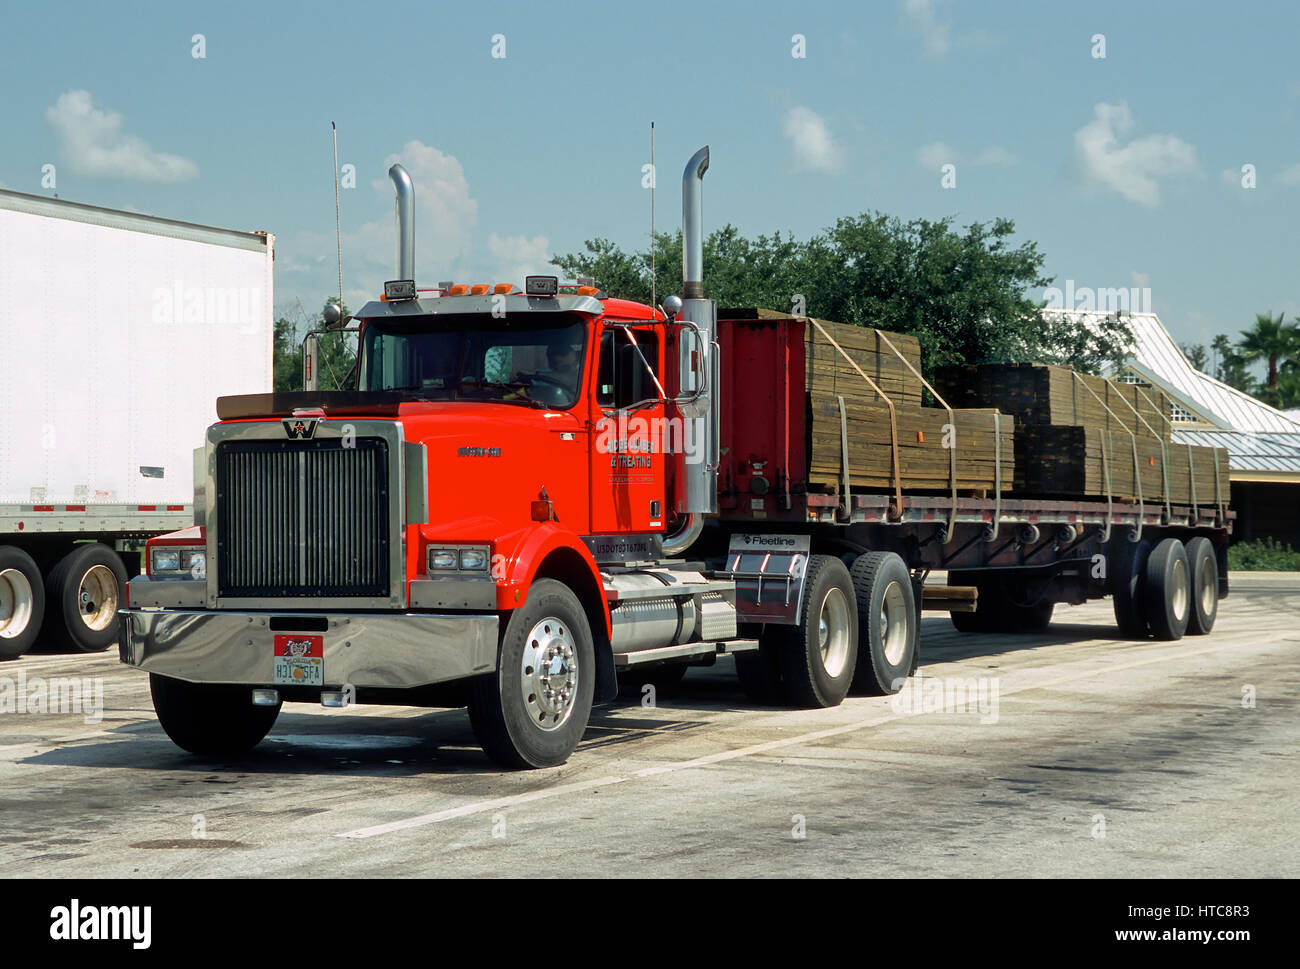 Western Star Truck High Resolution Stock Photography and Images - Alamy